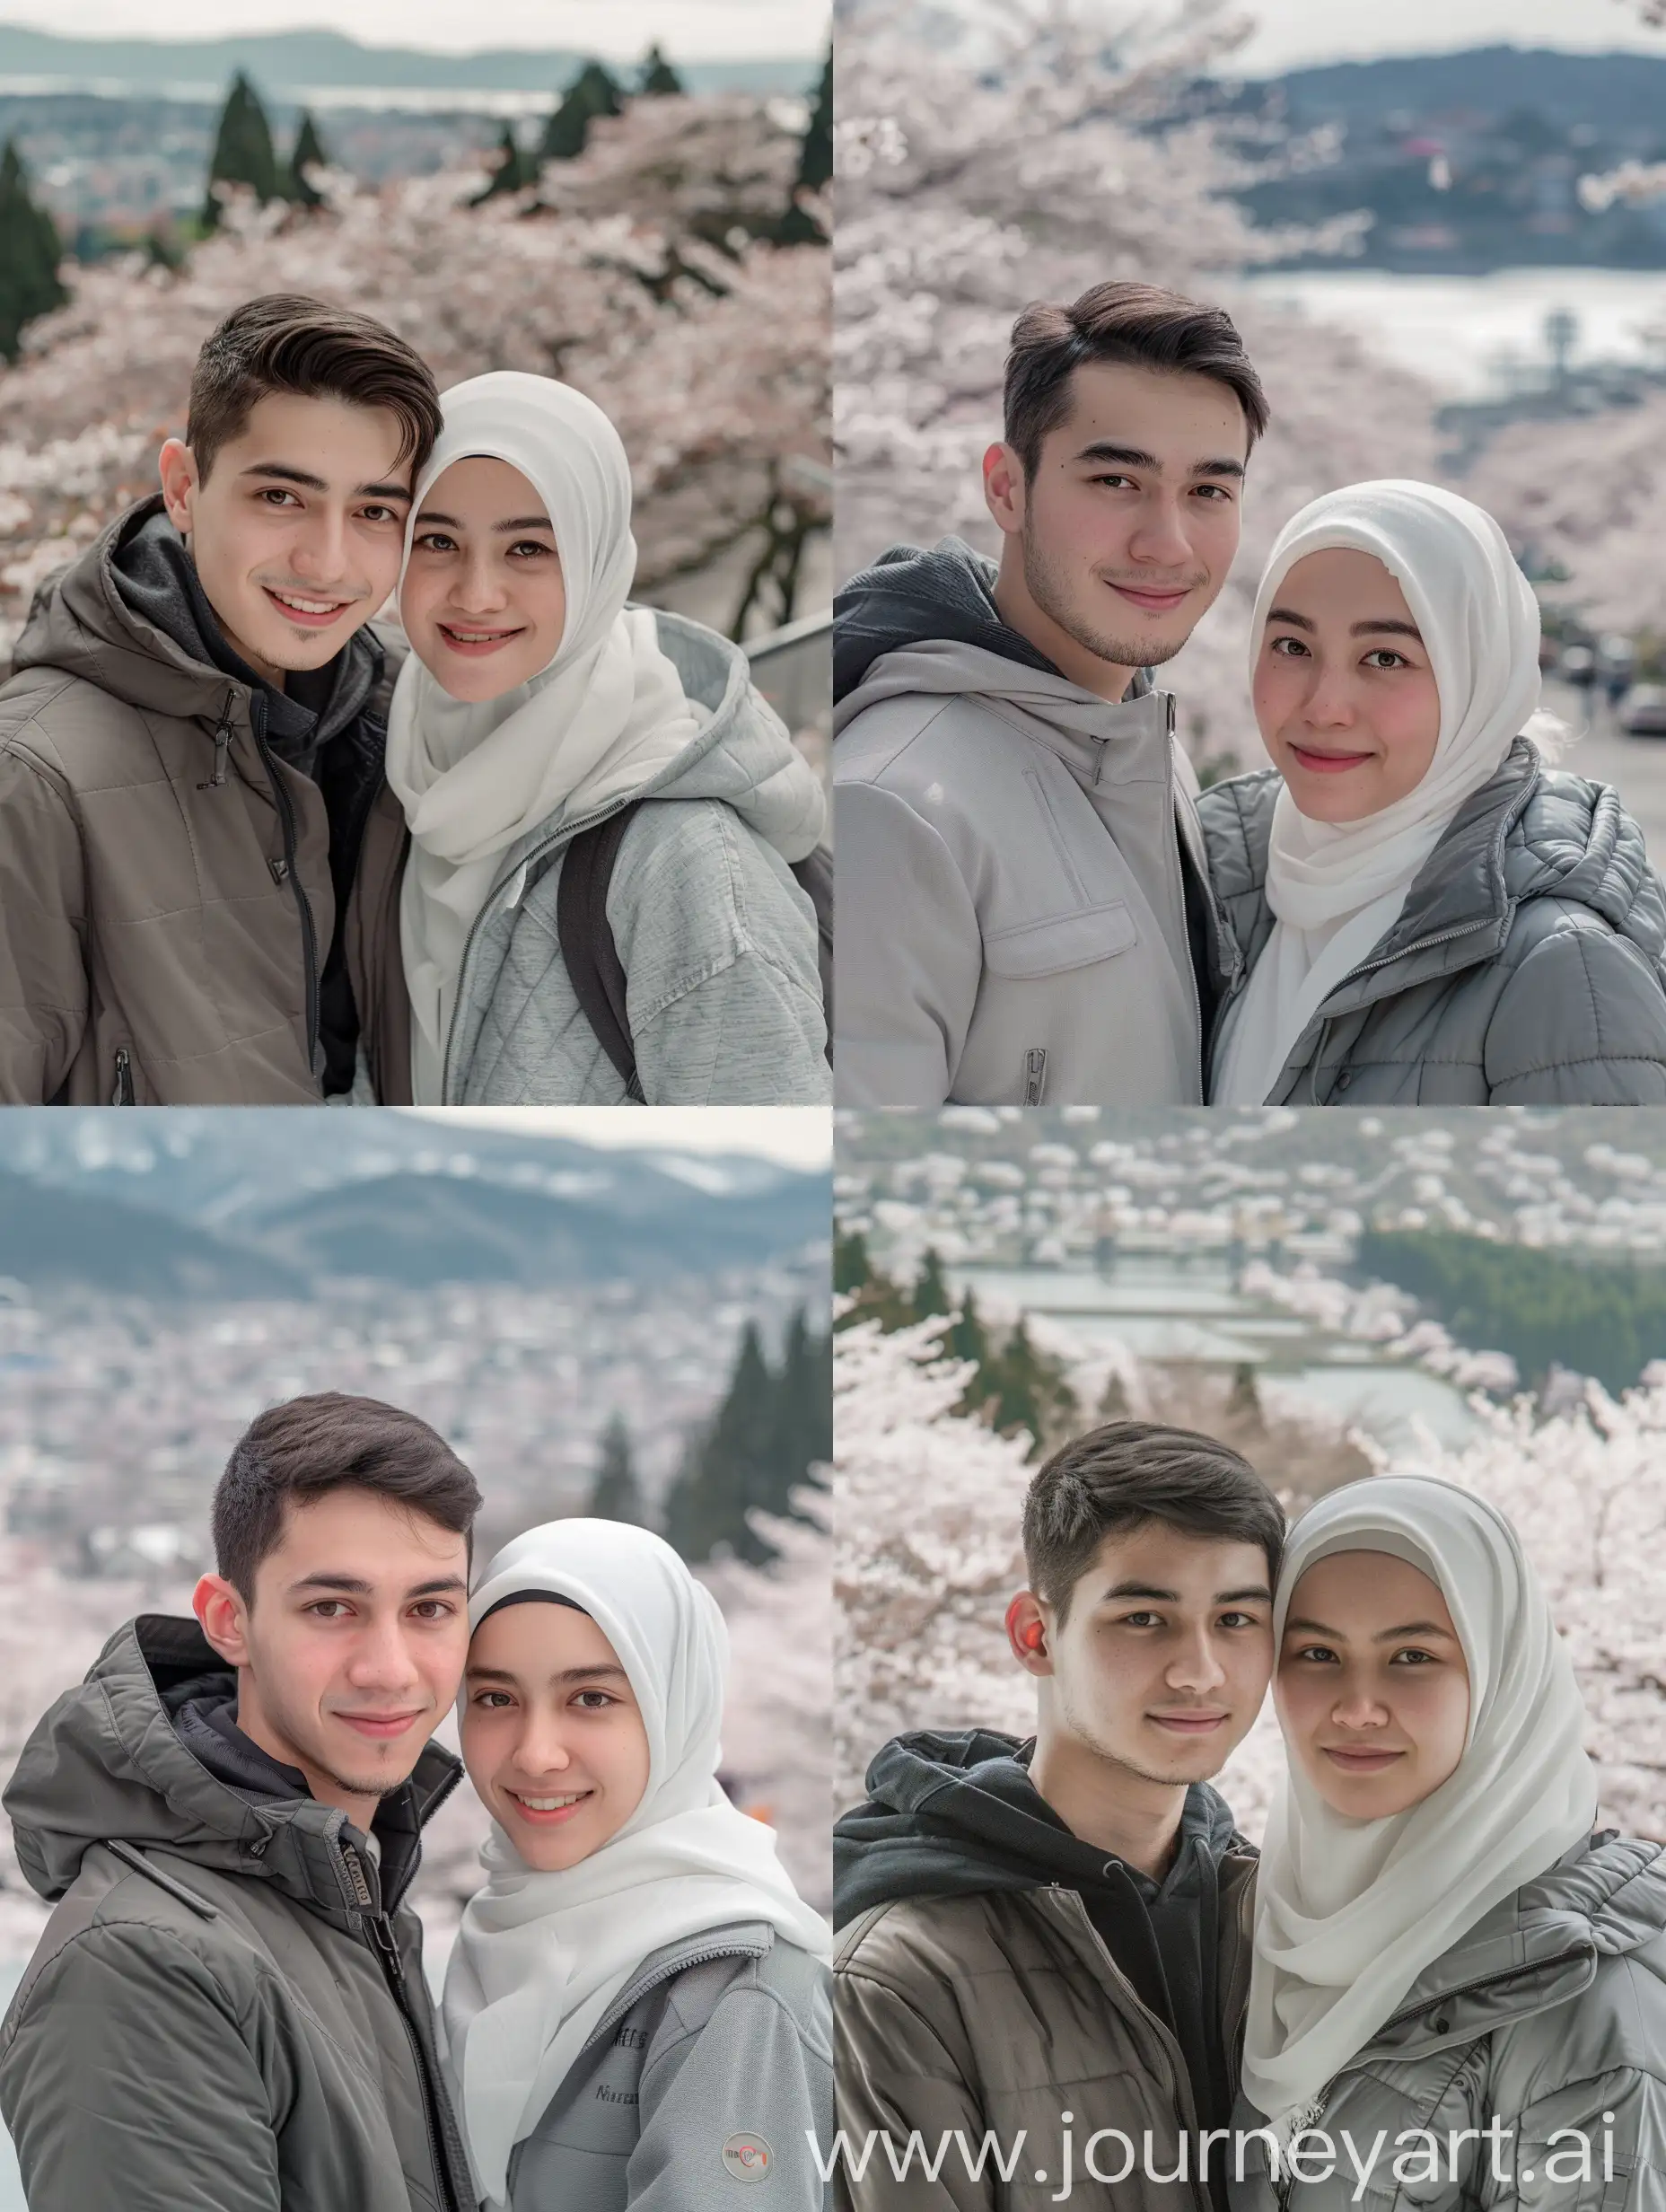 (8K, RAW Photo, Photography, Photorealistic, Realistic, Highest Quality, Intricate Detail), Medium photo of 25 year old Indonesian man, fit body, ideal body, oval face, white skin, natural skin, medium hair, wearing winter jacket, side by side with a 25 year old Indonesian woman wearing a white hijab, gray winter jacket, they smile facing the camera, their eyes look at the camera, the corners of their eyes are parallel to the Japanese view of many cherry trees in the background.